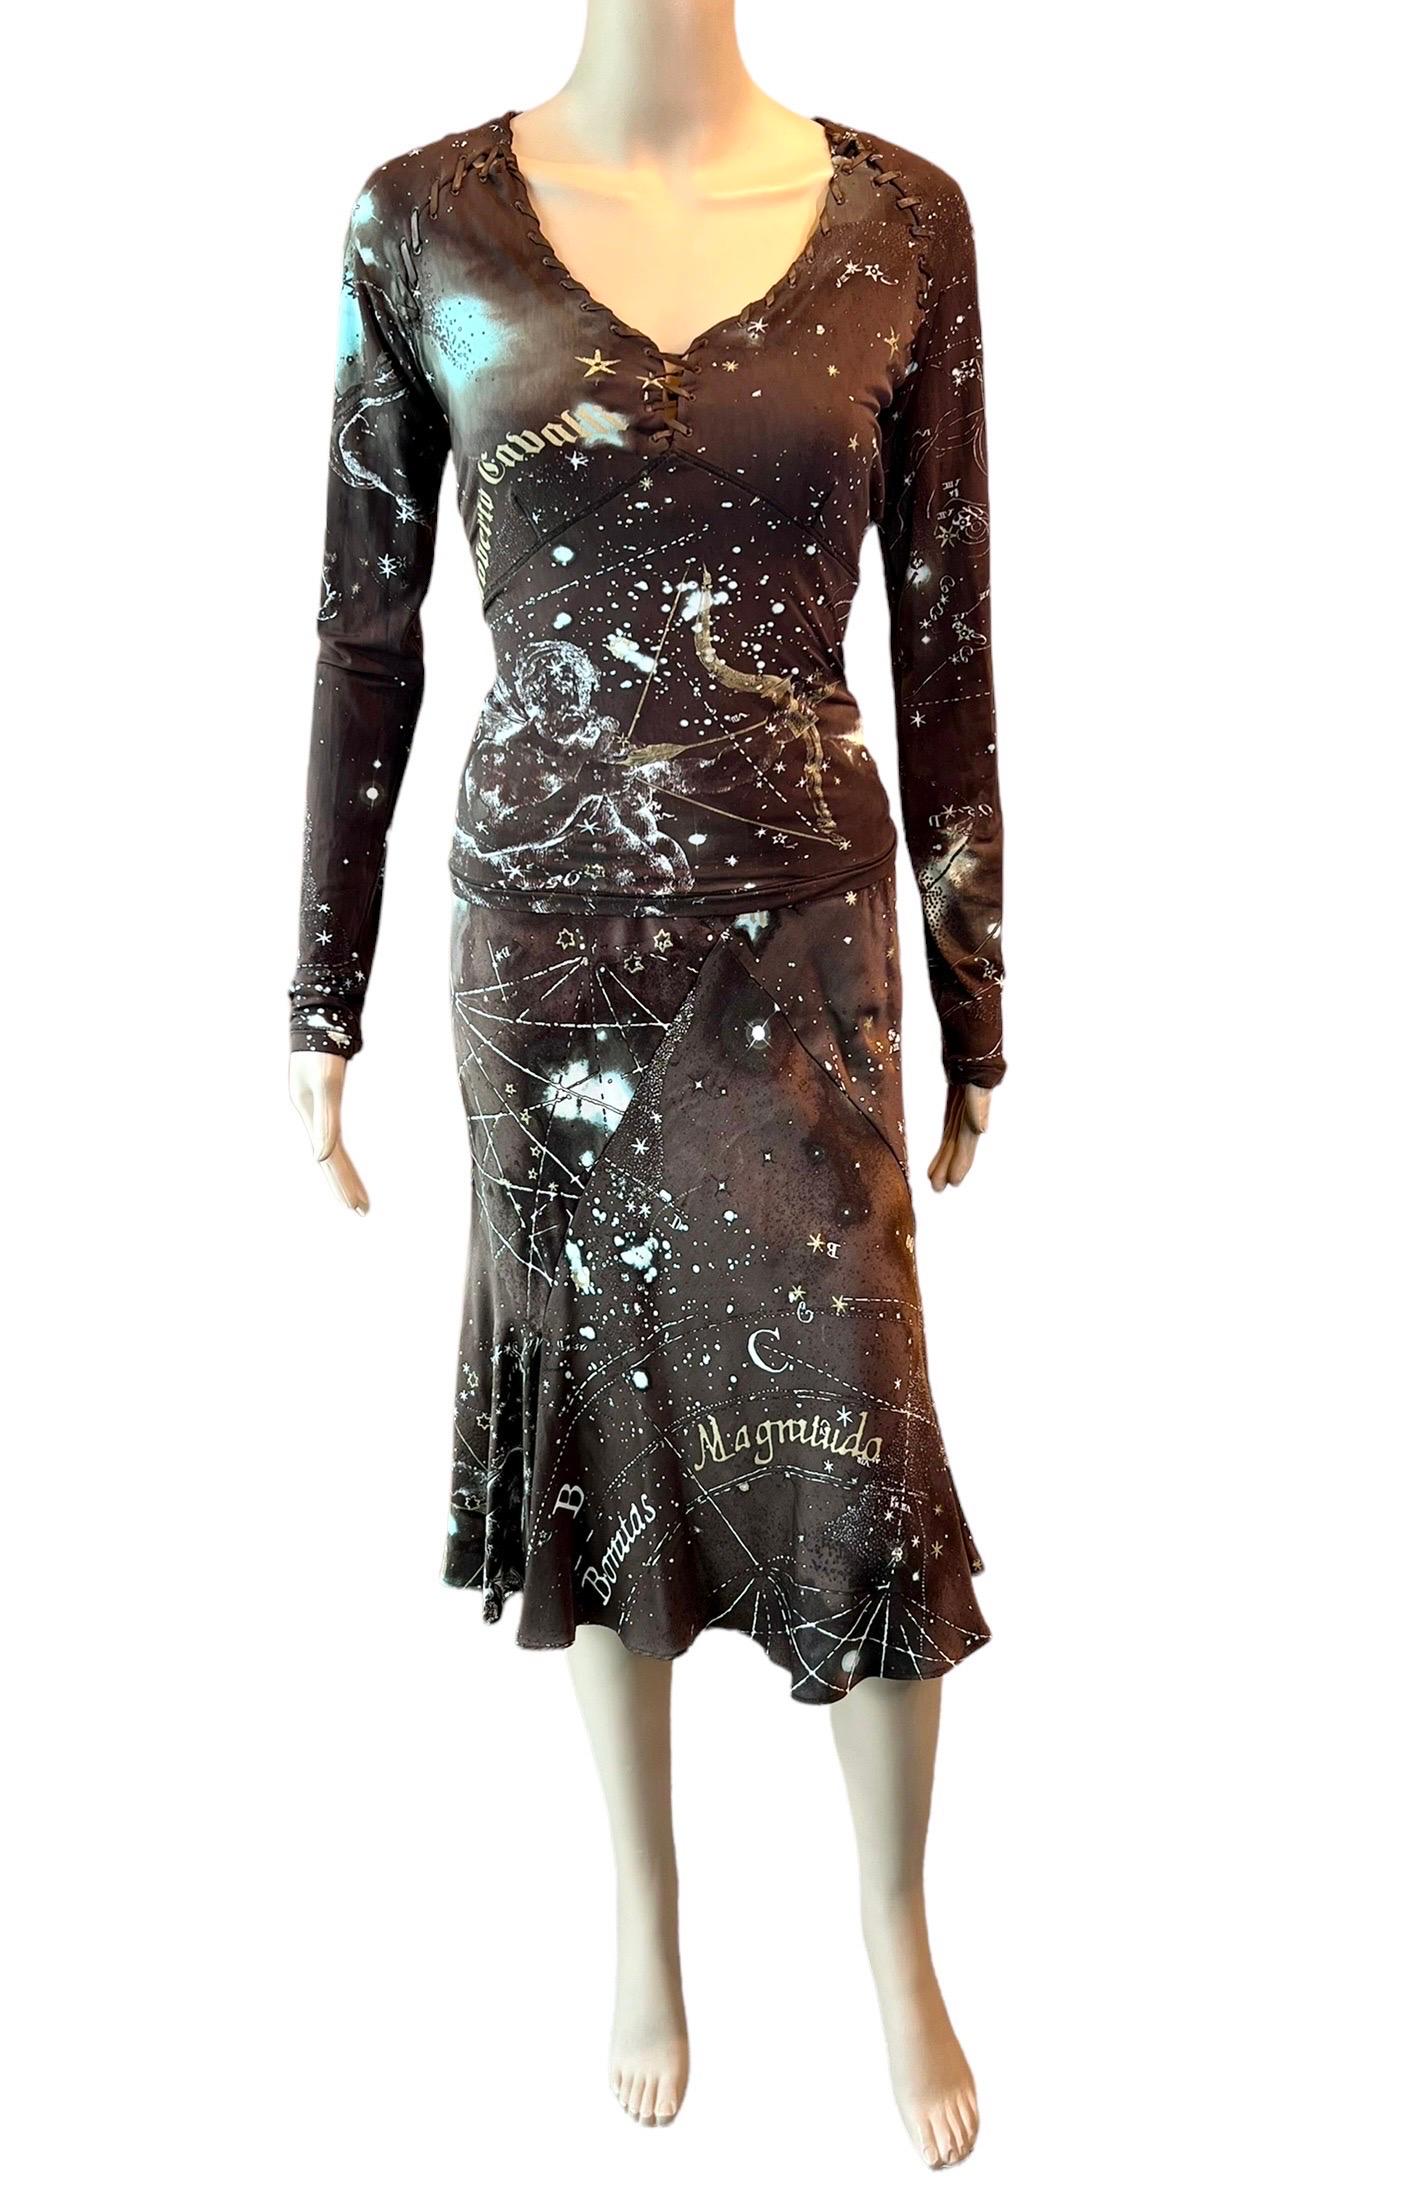 Roberto Cavalli F/W 2003 Constellation Astrology Print Skirt and Top 2 Piece Set For Sale 1